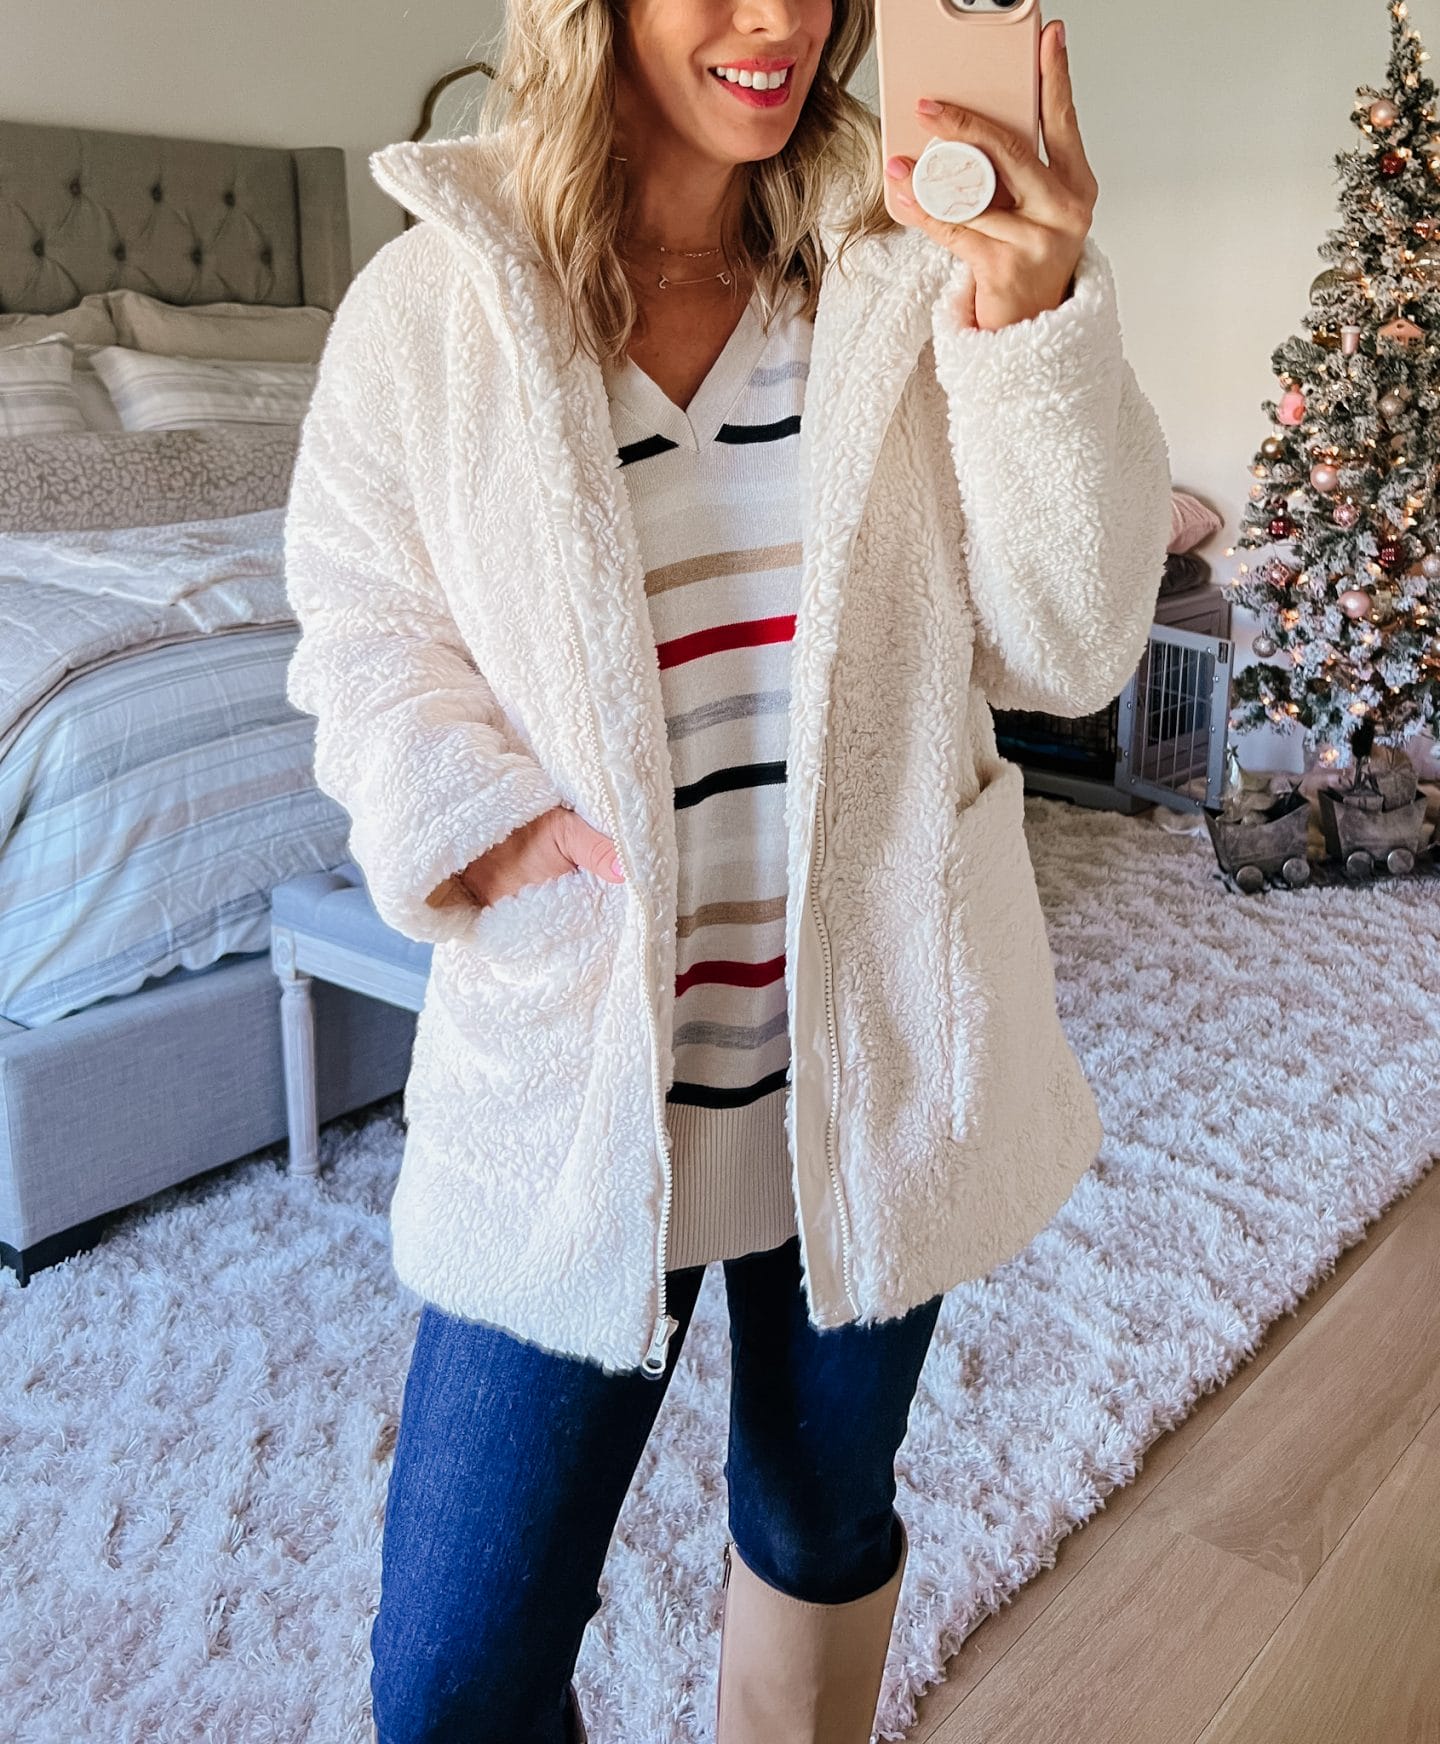 Striped Tunic Sweater, Jeans, Boots, Sherpa Jacket 